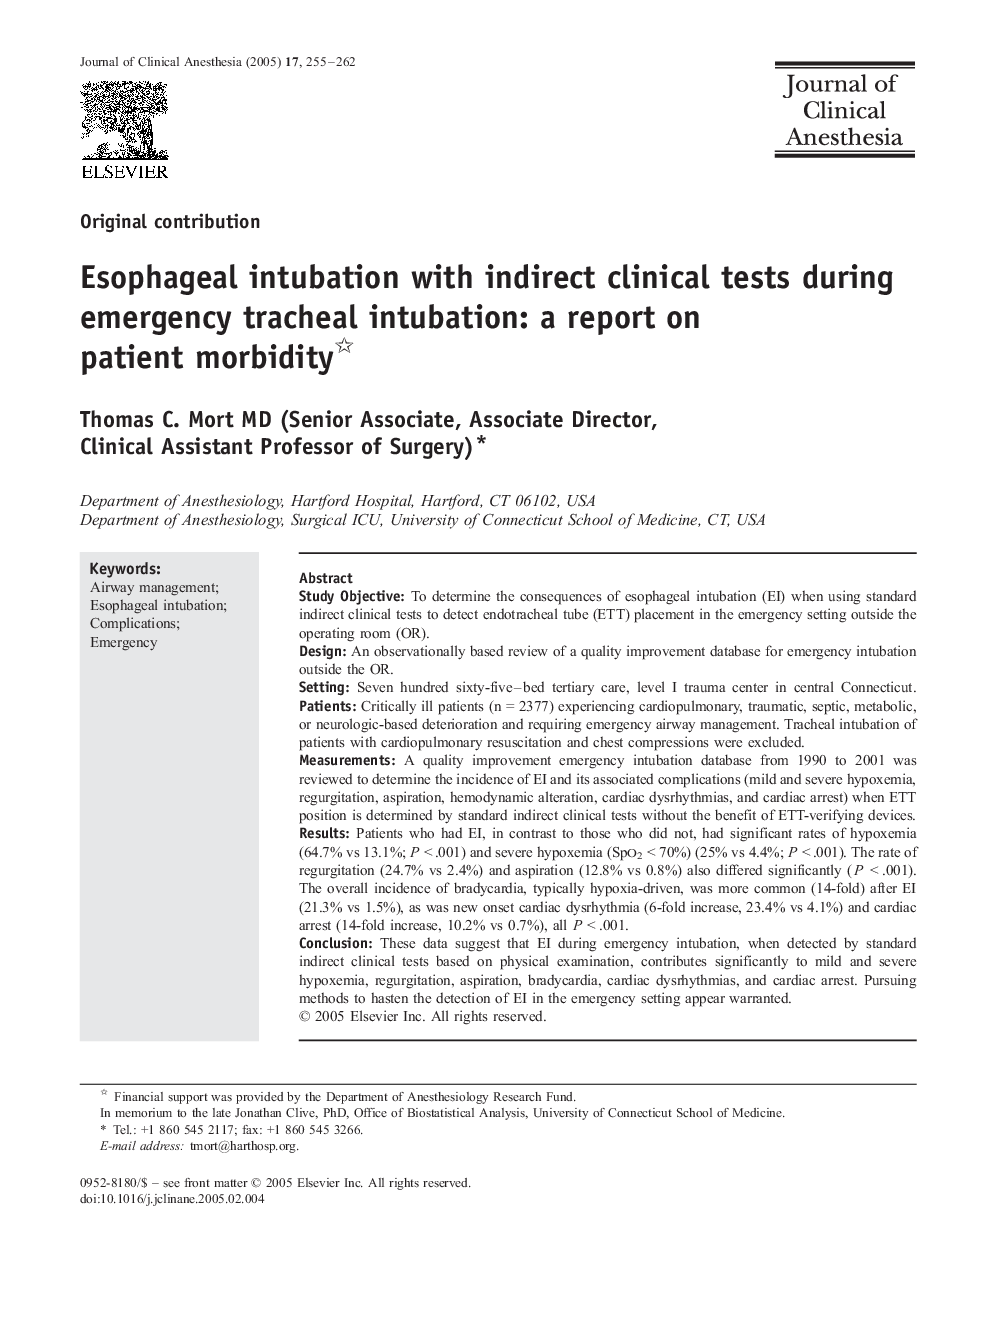 Esophageal intubation with indirect clinical tests during emergency tracheal intubation: a report on patient morbidity